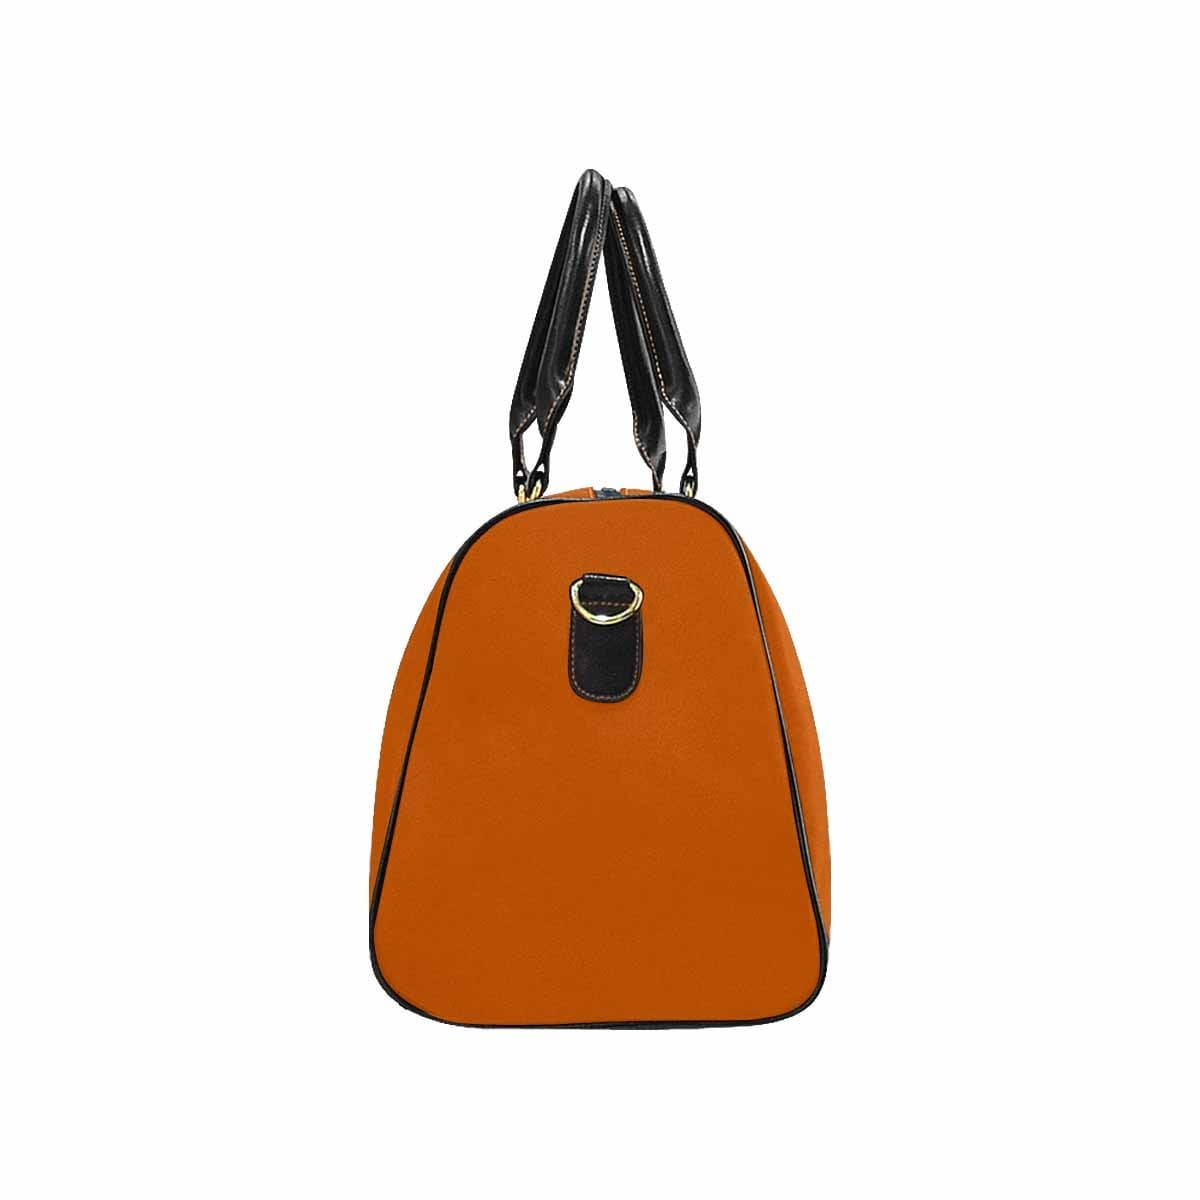 Travel Bag Leather Carry On Large Luggage Bag Burnt Orange - Bags | Travel Bags